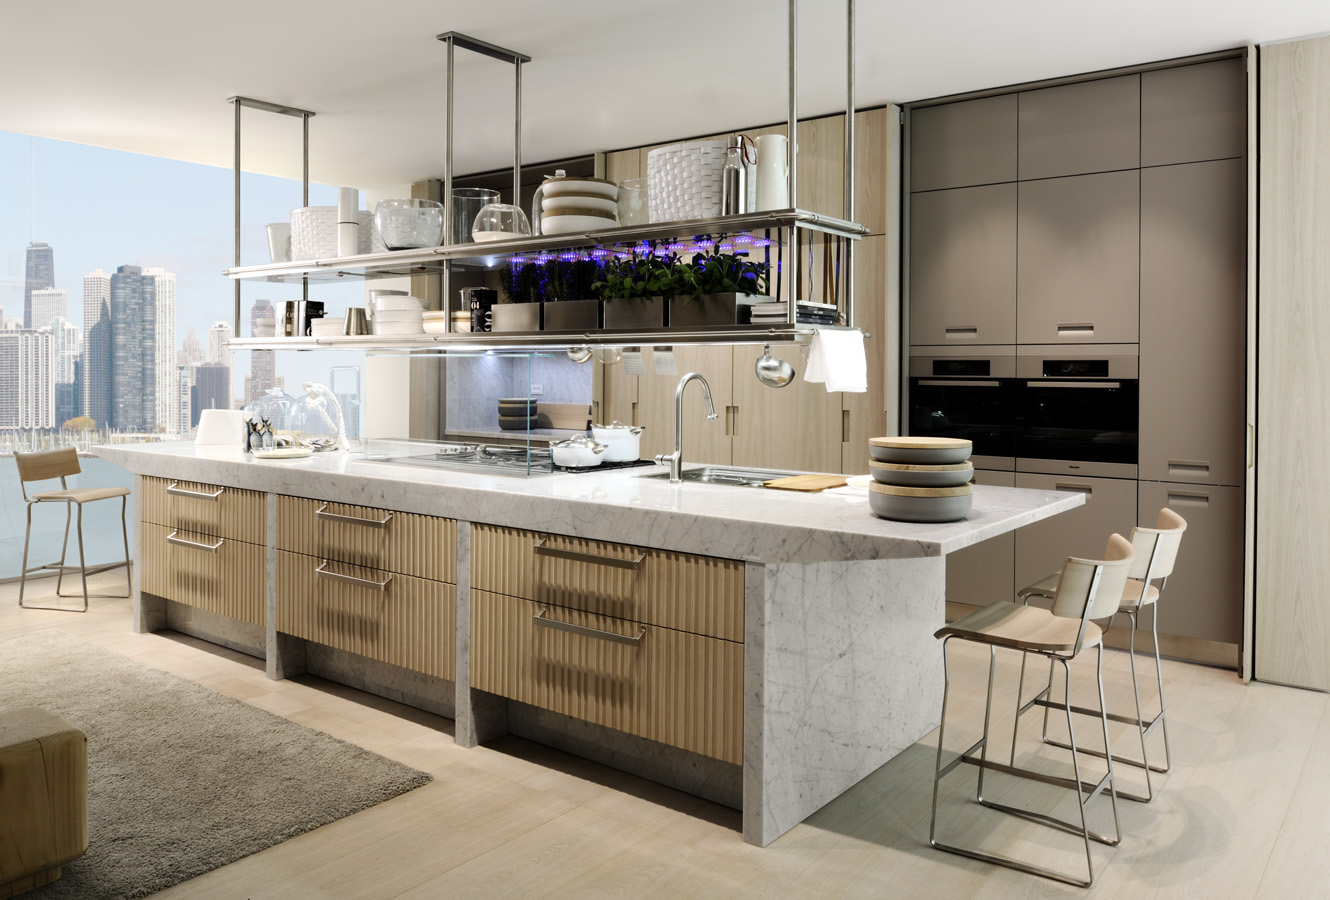 White Kitchen Island Astonishing White Kitchen Design With Island Marble Made Completed With Sink And Range Plus Furnished With High Chairs And Hanging Pot Rack Kitchen Kitchen Designs With Islands: Modern Kitchen Setting